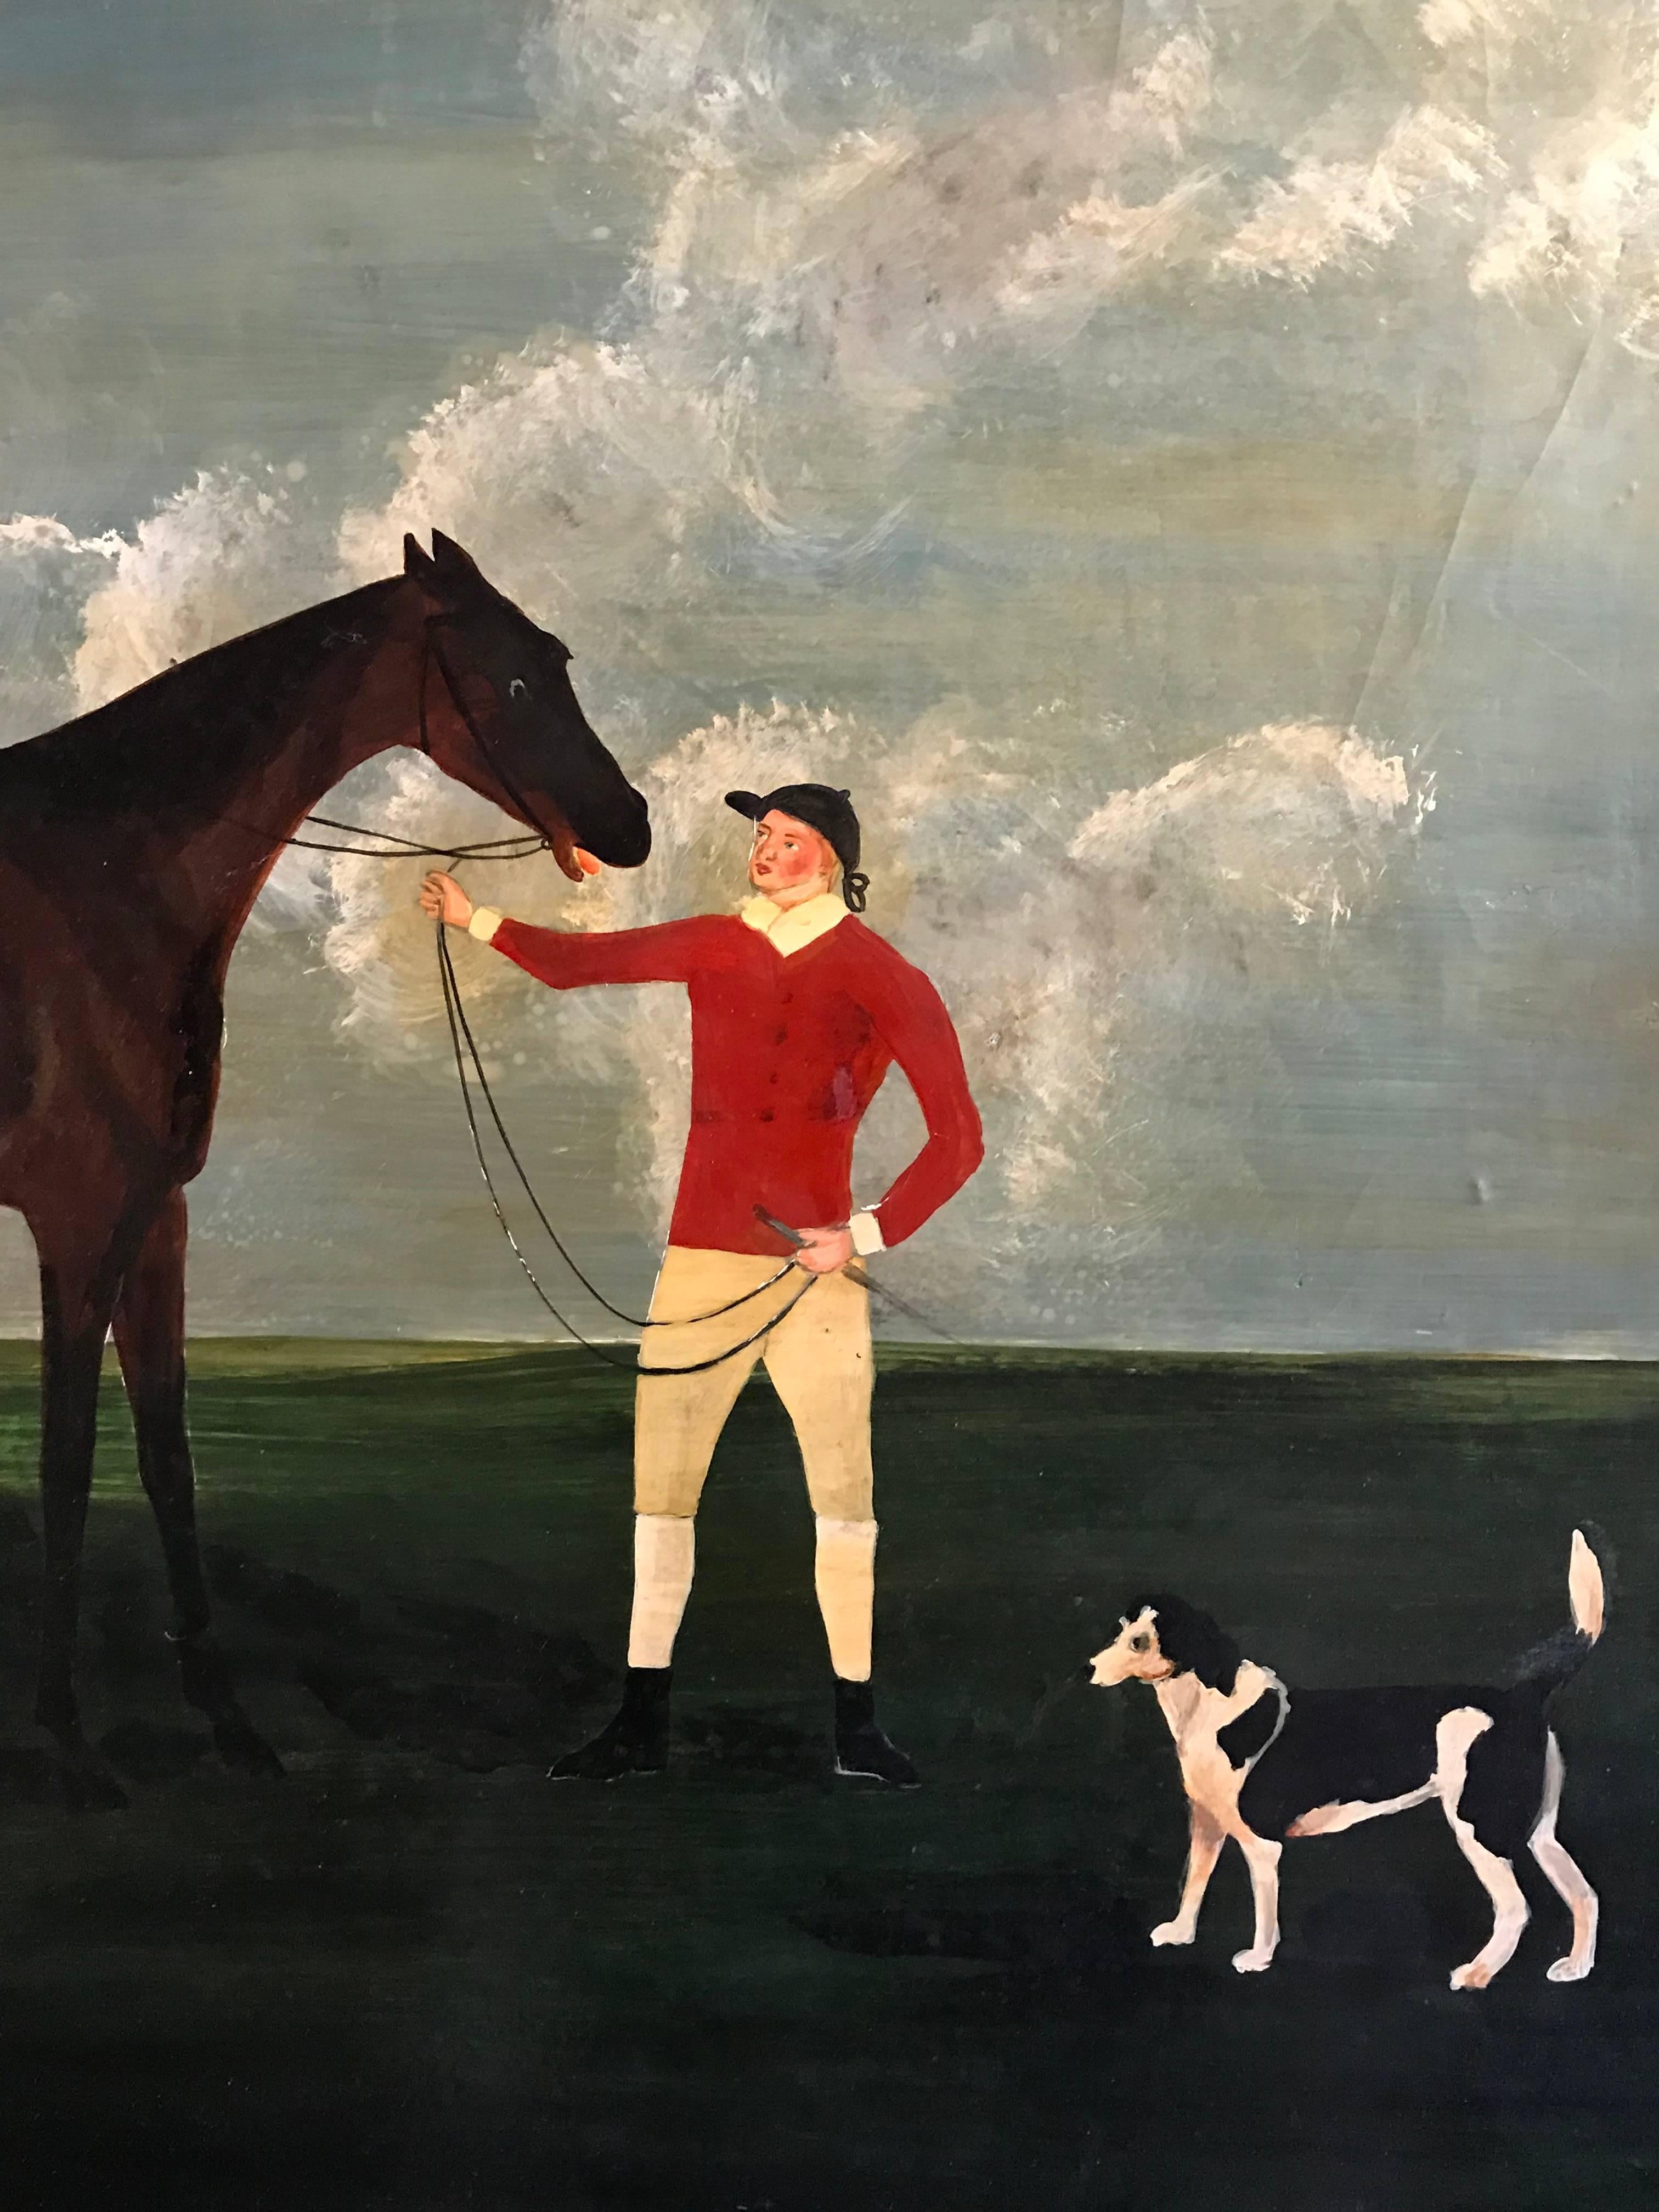 The Favourite Hunter
English School, mid 20th century
oil painting on board, framed
framed: 26 x 37 inches

Lovely English hunting scene oil painting, depicting a huntsman standing in an open landscape with his favourite hunter and hounds. The